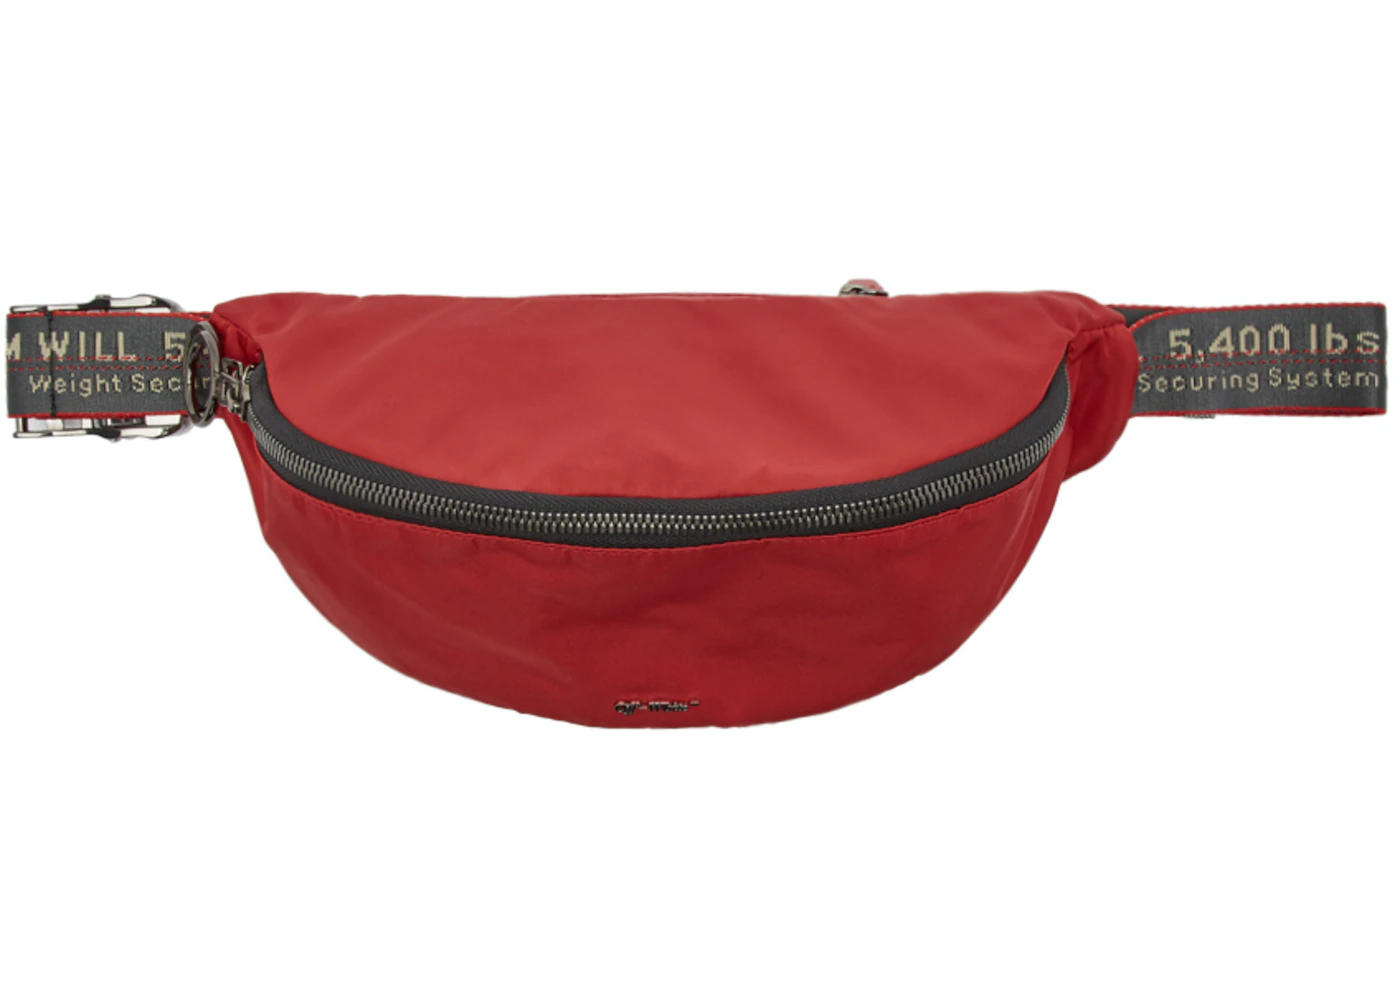 OFF-WHITE Basic Fannypack Red in Nylon with Gunmetal - US